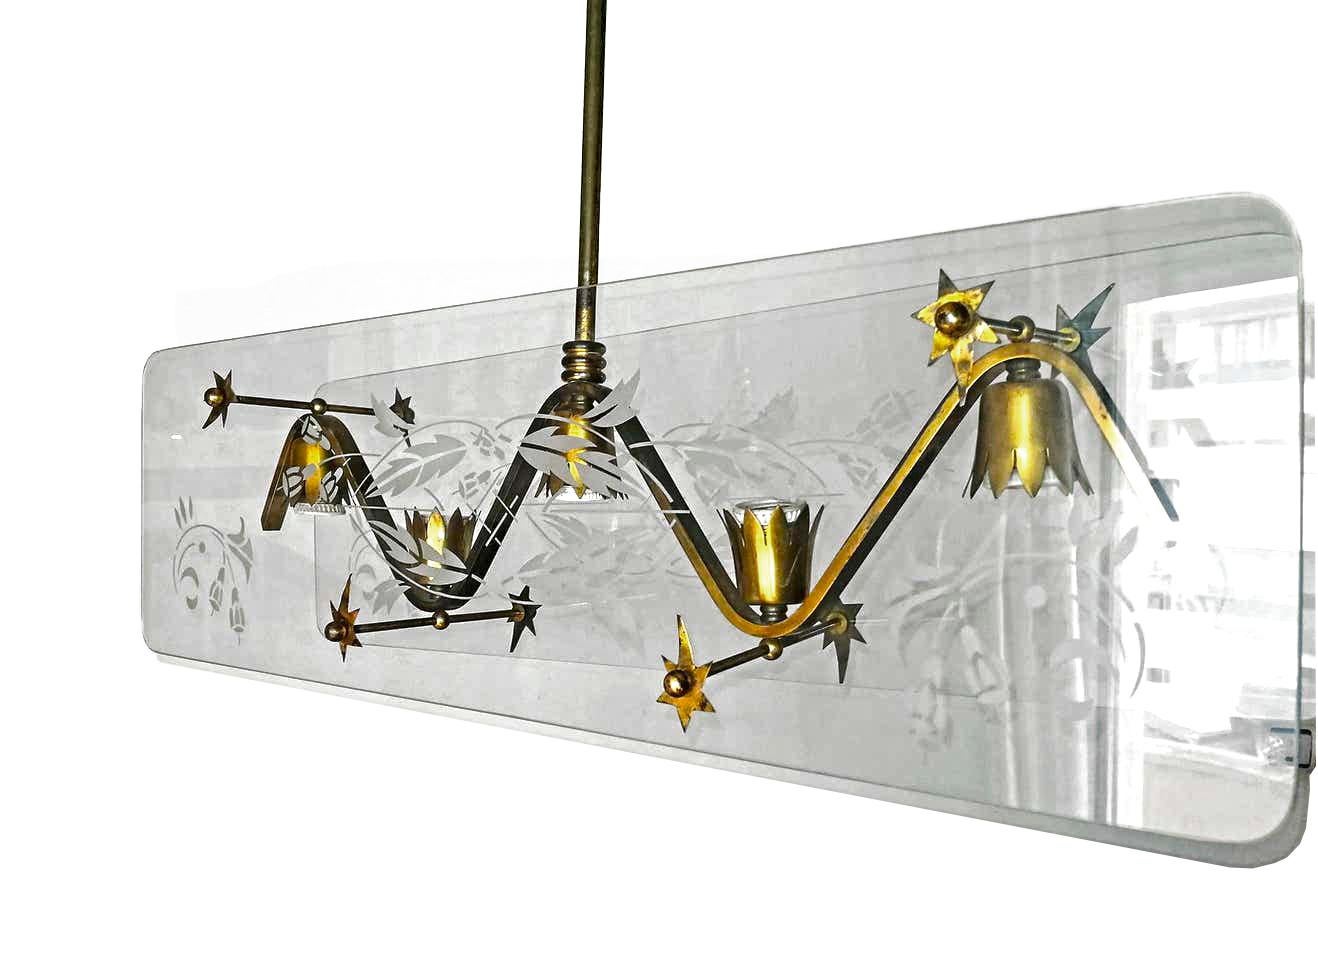 Italian Midcentury Attr to Pietro Chiesa Fontana Art Deco Gilt Chandelier c1950 In Good Condition For Sale In Coimbra, PT